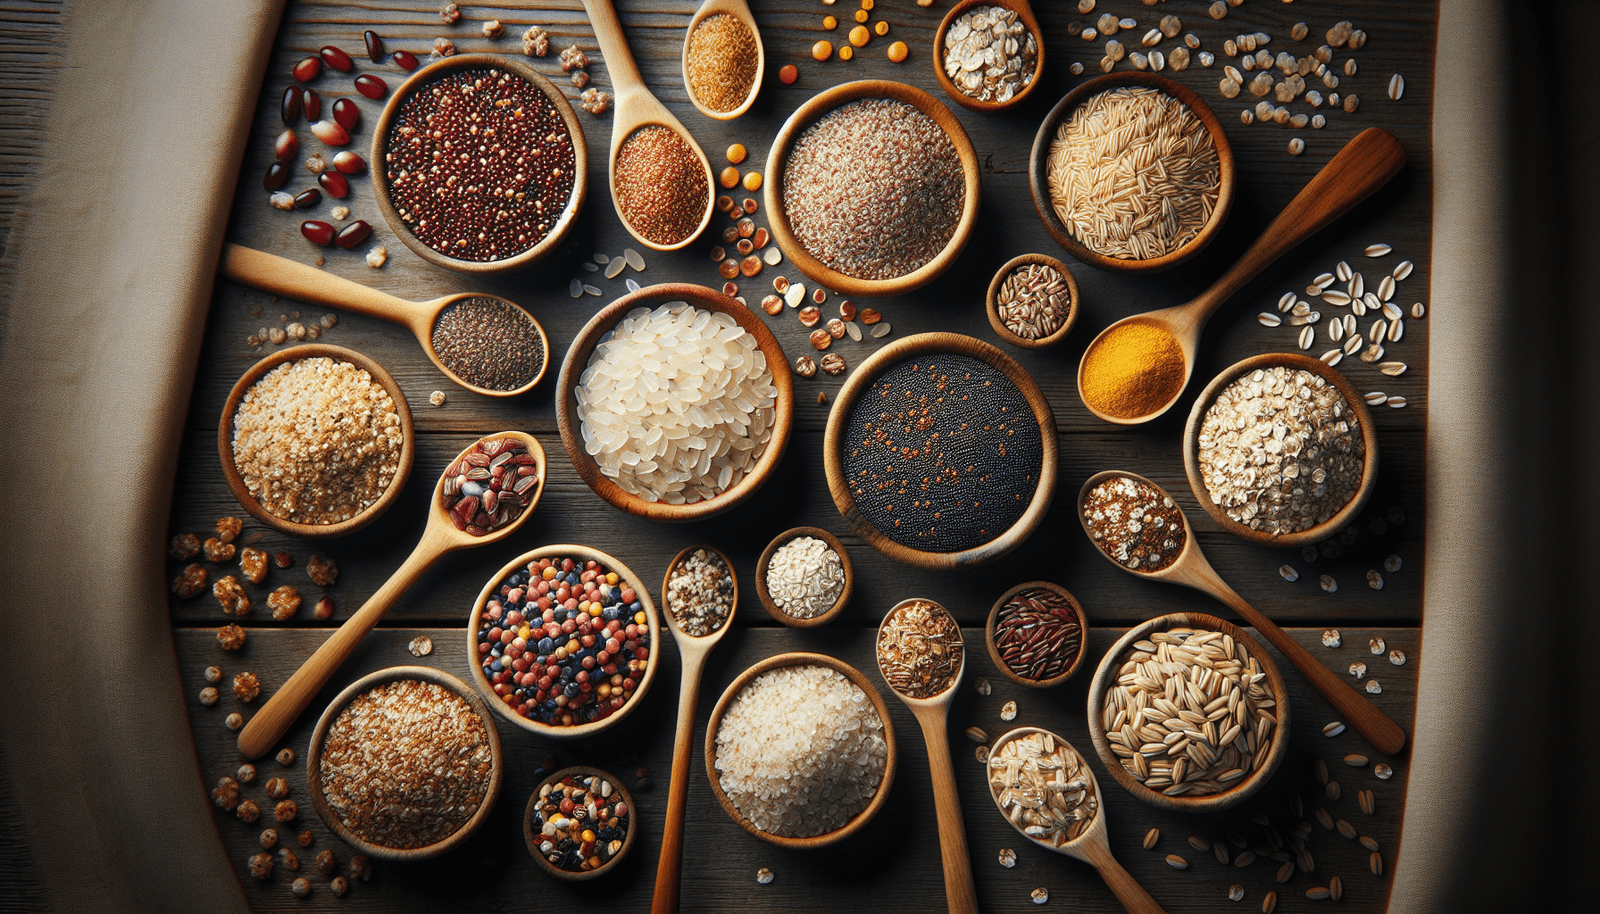 A Guide To Healthy Grains: What To Eat And What To Avoid